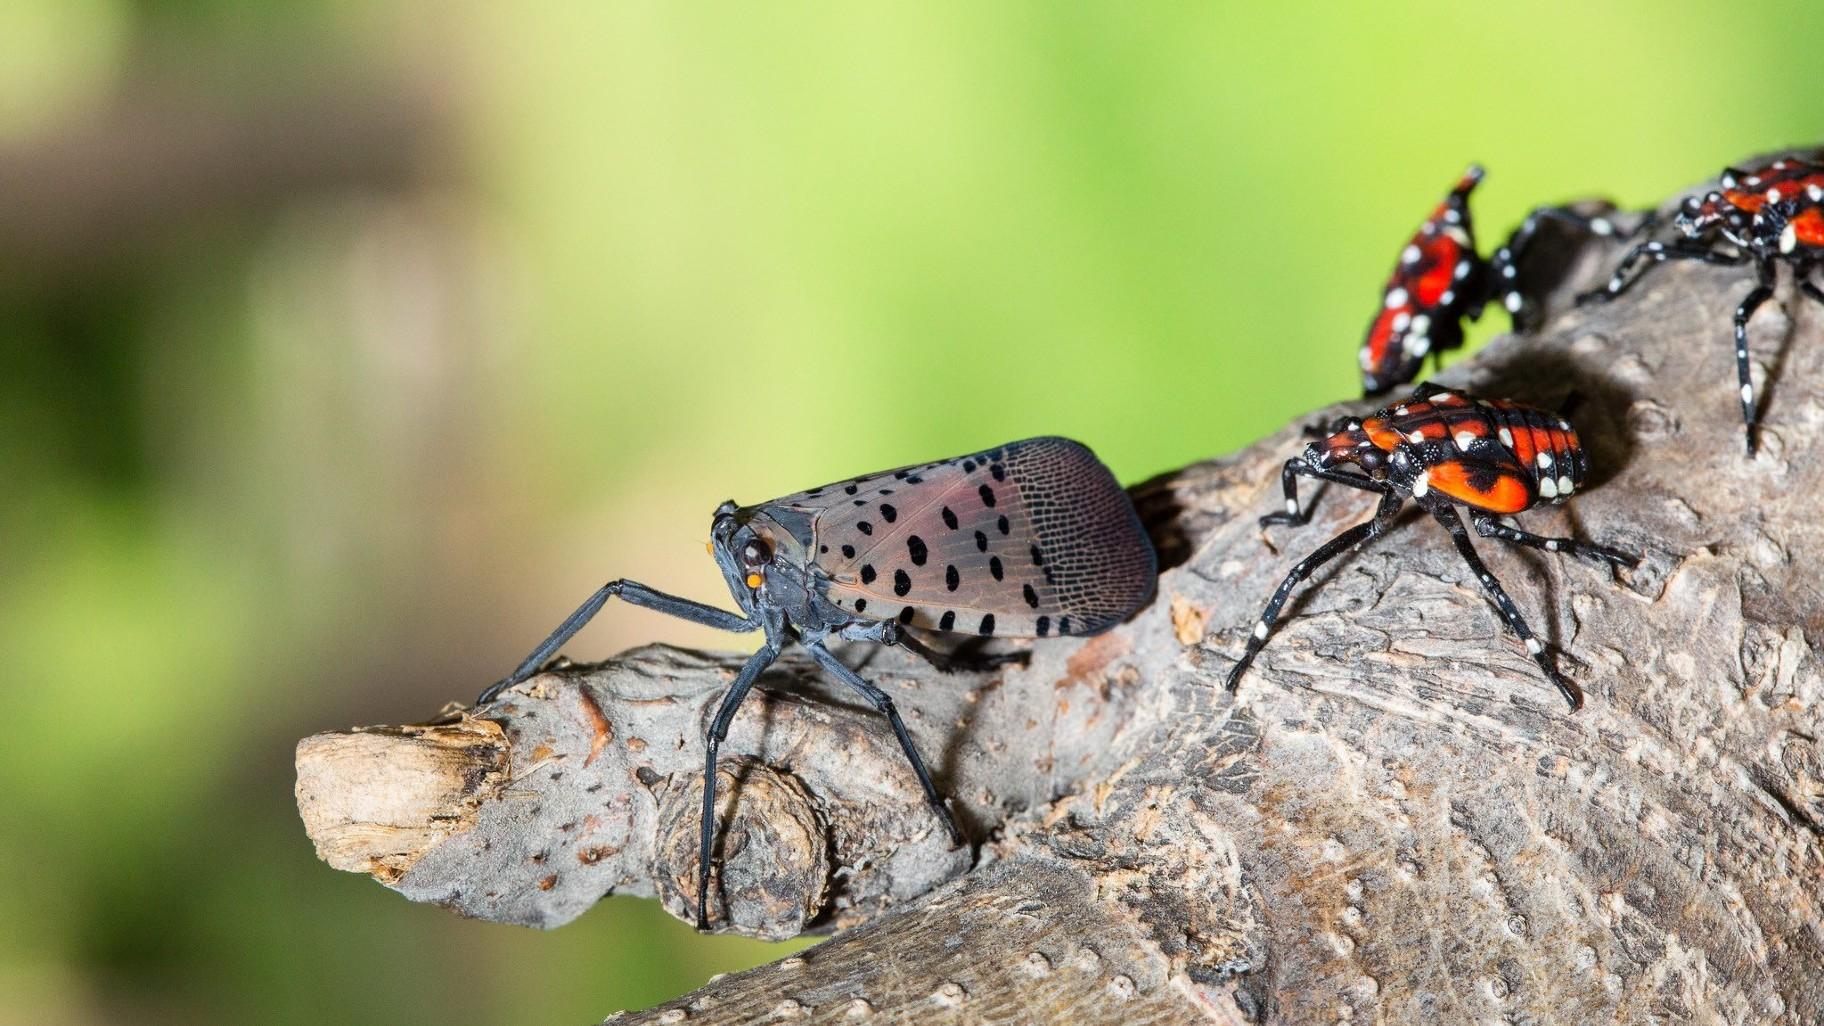 Spotted lanternfly adult (left) and nymphs. (U.S. Department of Agriculture)